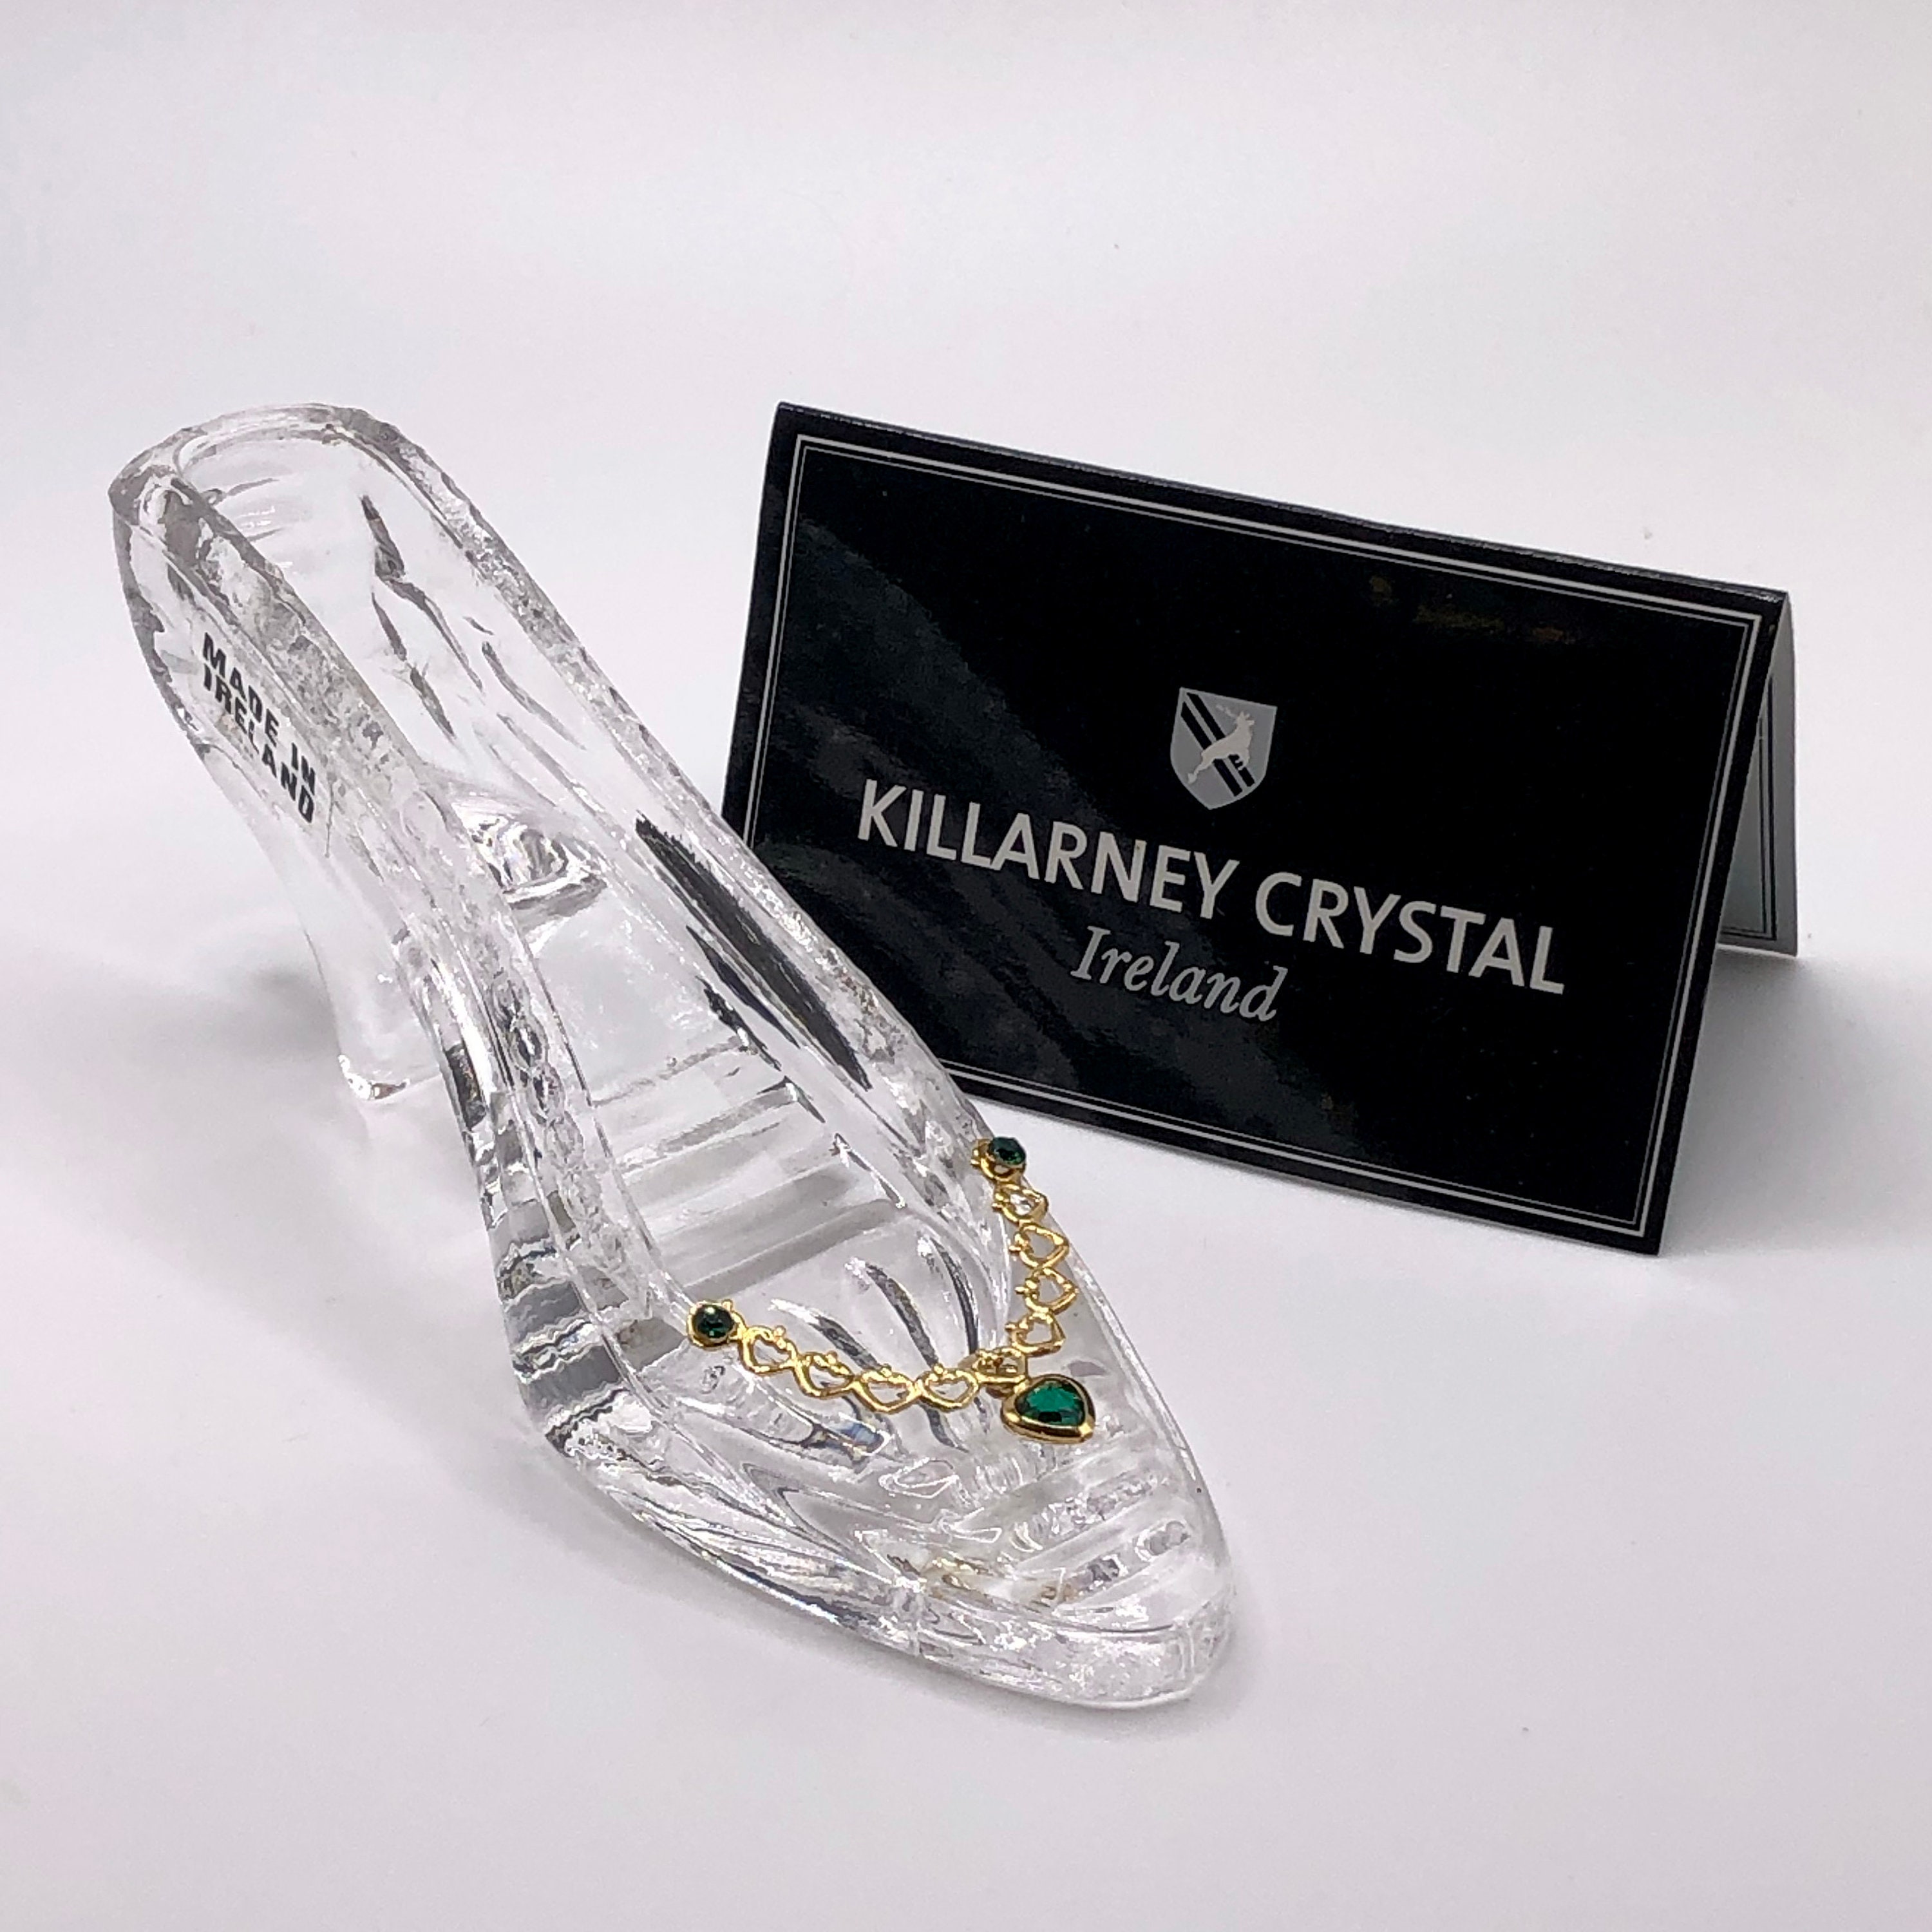 I present you, the cinderella shoe! Straight from the Swarovski World  Museum in Austria! - Gaming | Cinderella shoes, Fancy shoes, Crystal shoes